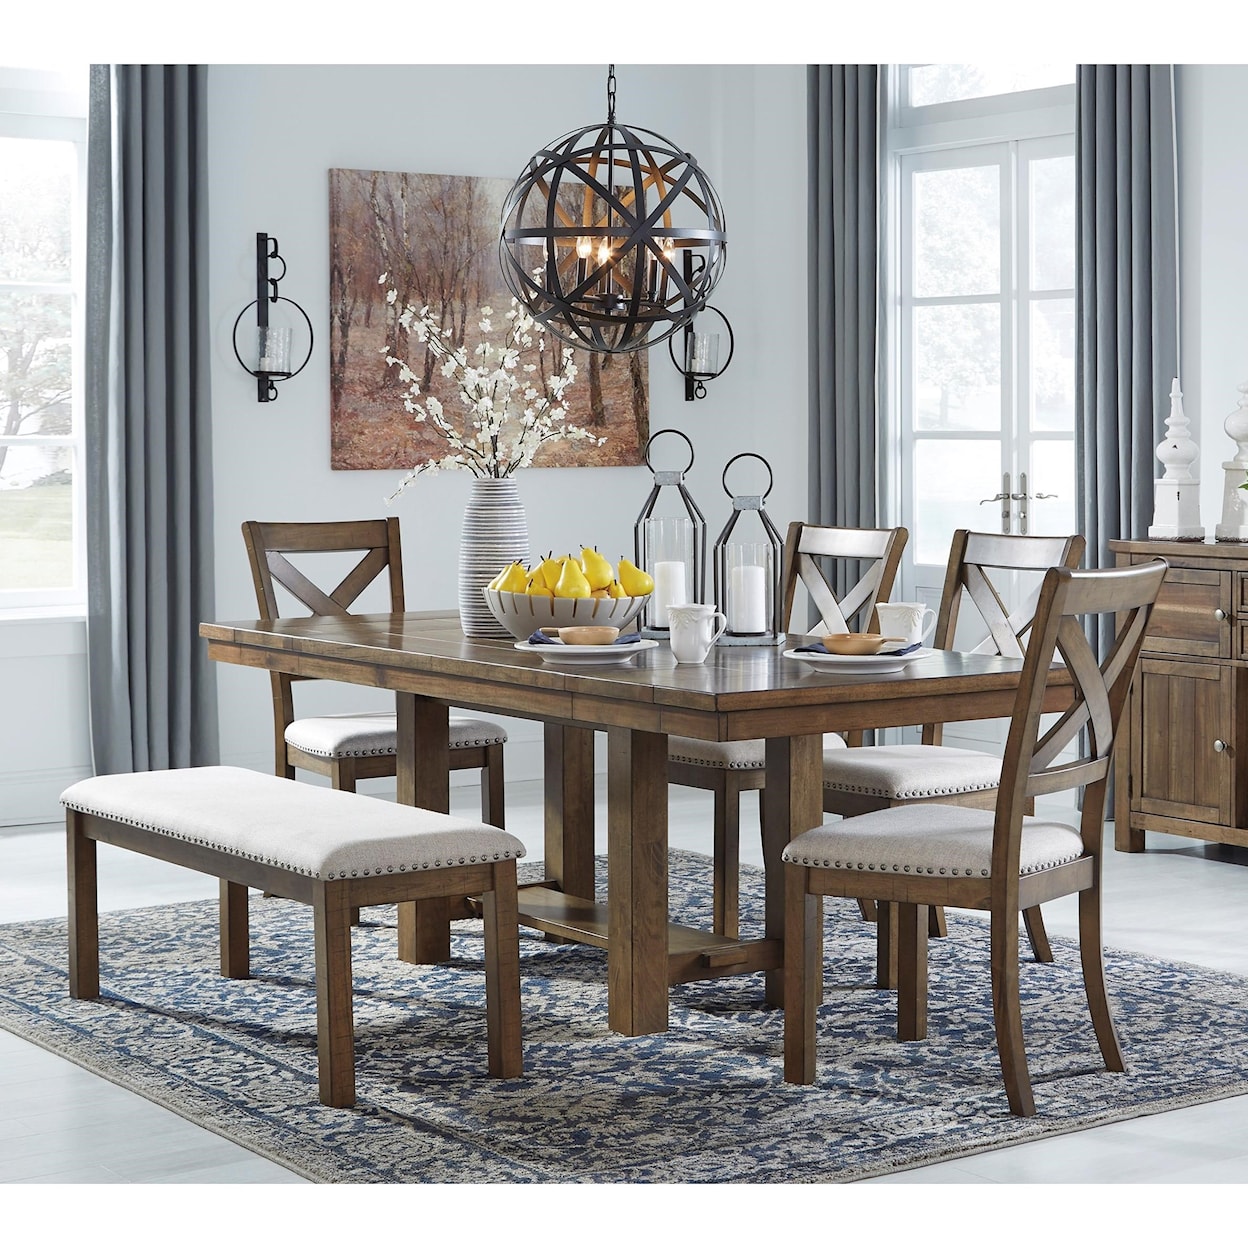 Signature Design by Ashley Moriville 6-Piece Table and Chair Set with Bench